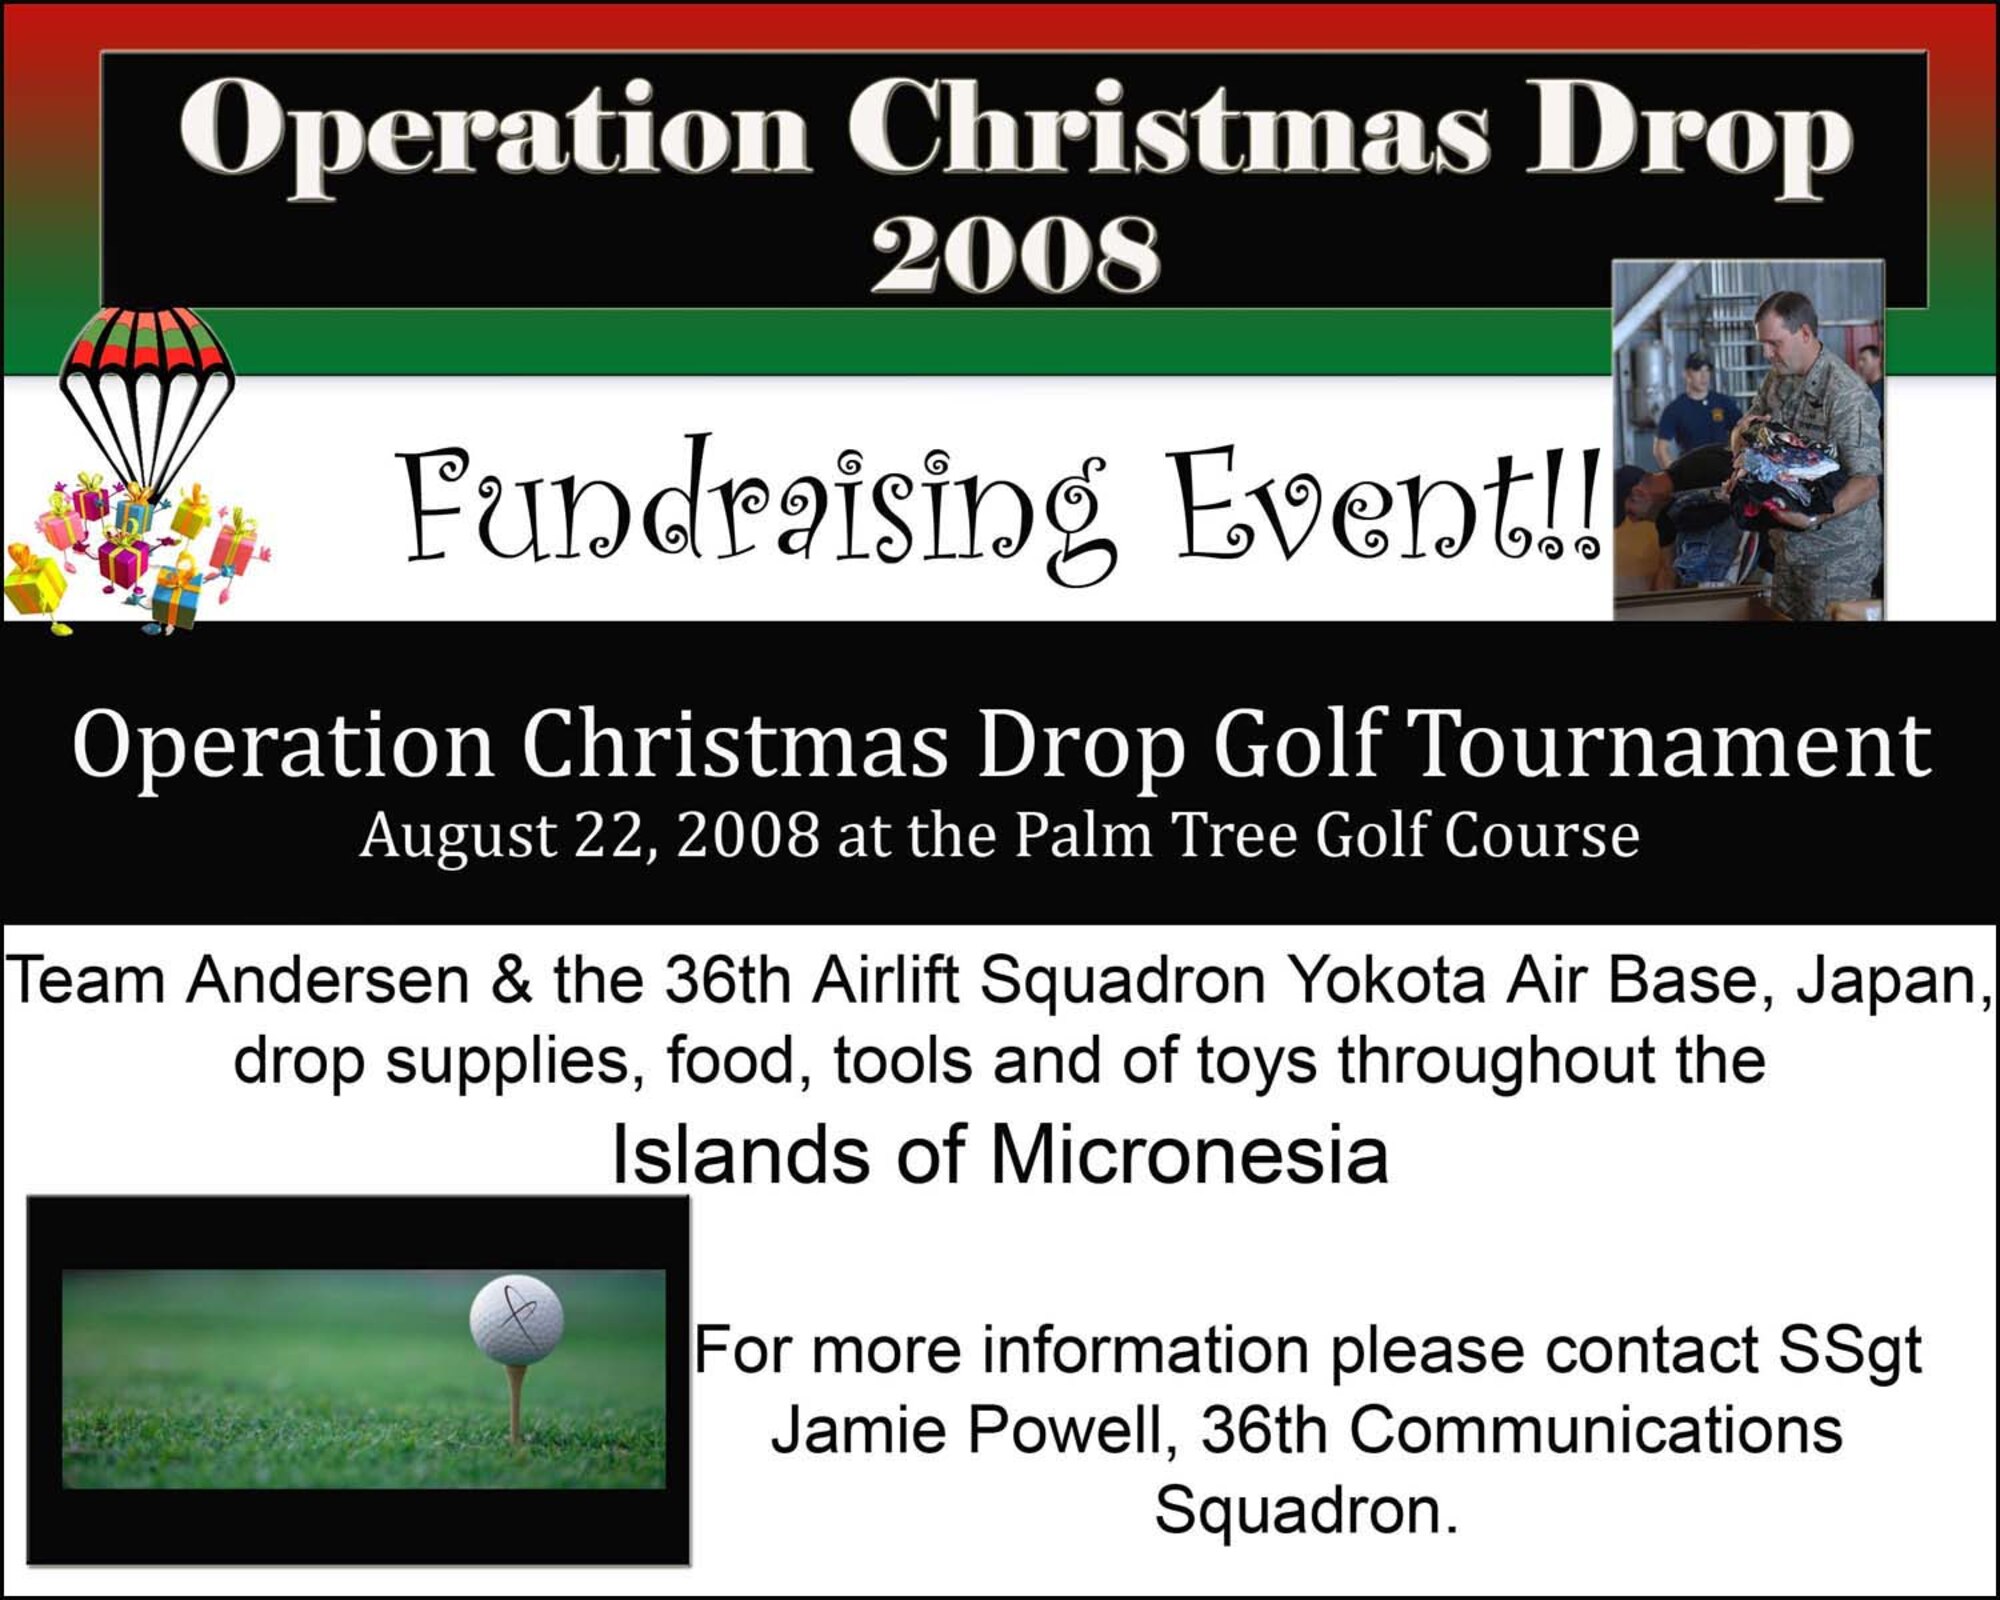 ANDERSEN AIR FORCE BASE, Guam - Operation Christmas Drop fund raising efforts are underway here with the first event scheduled for Aug. 22 at the Palm Tree Golf Course. Operation Christmas Drop is the longest-running air drop mission and it in Team Andersen and the 36th Airlift Squadron, Yokota Air Base, Japan, drop supplies, food, tools and toys throughout the Micronesia Islands.